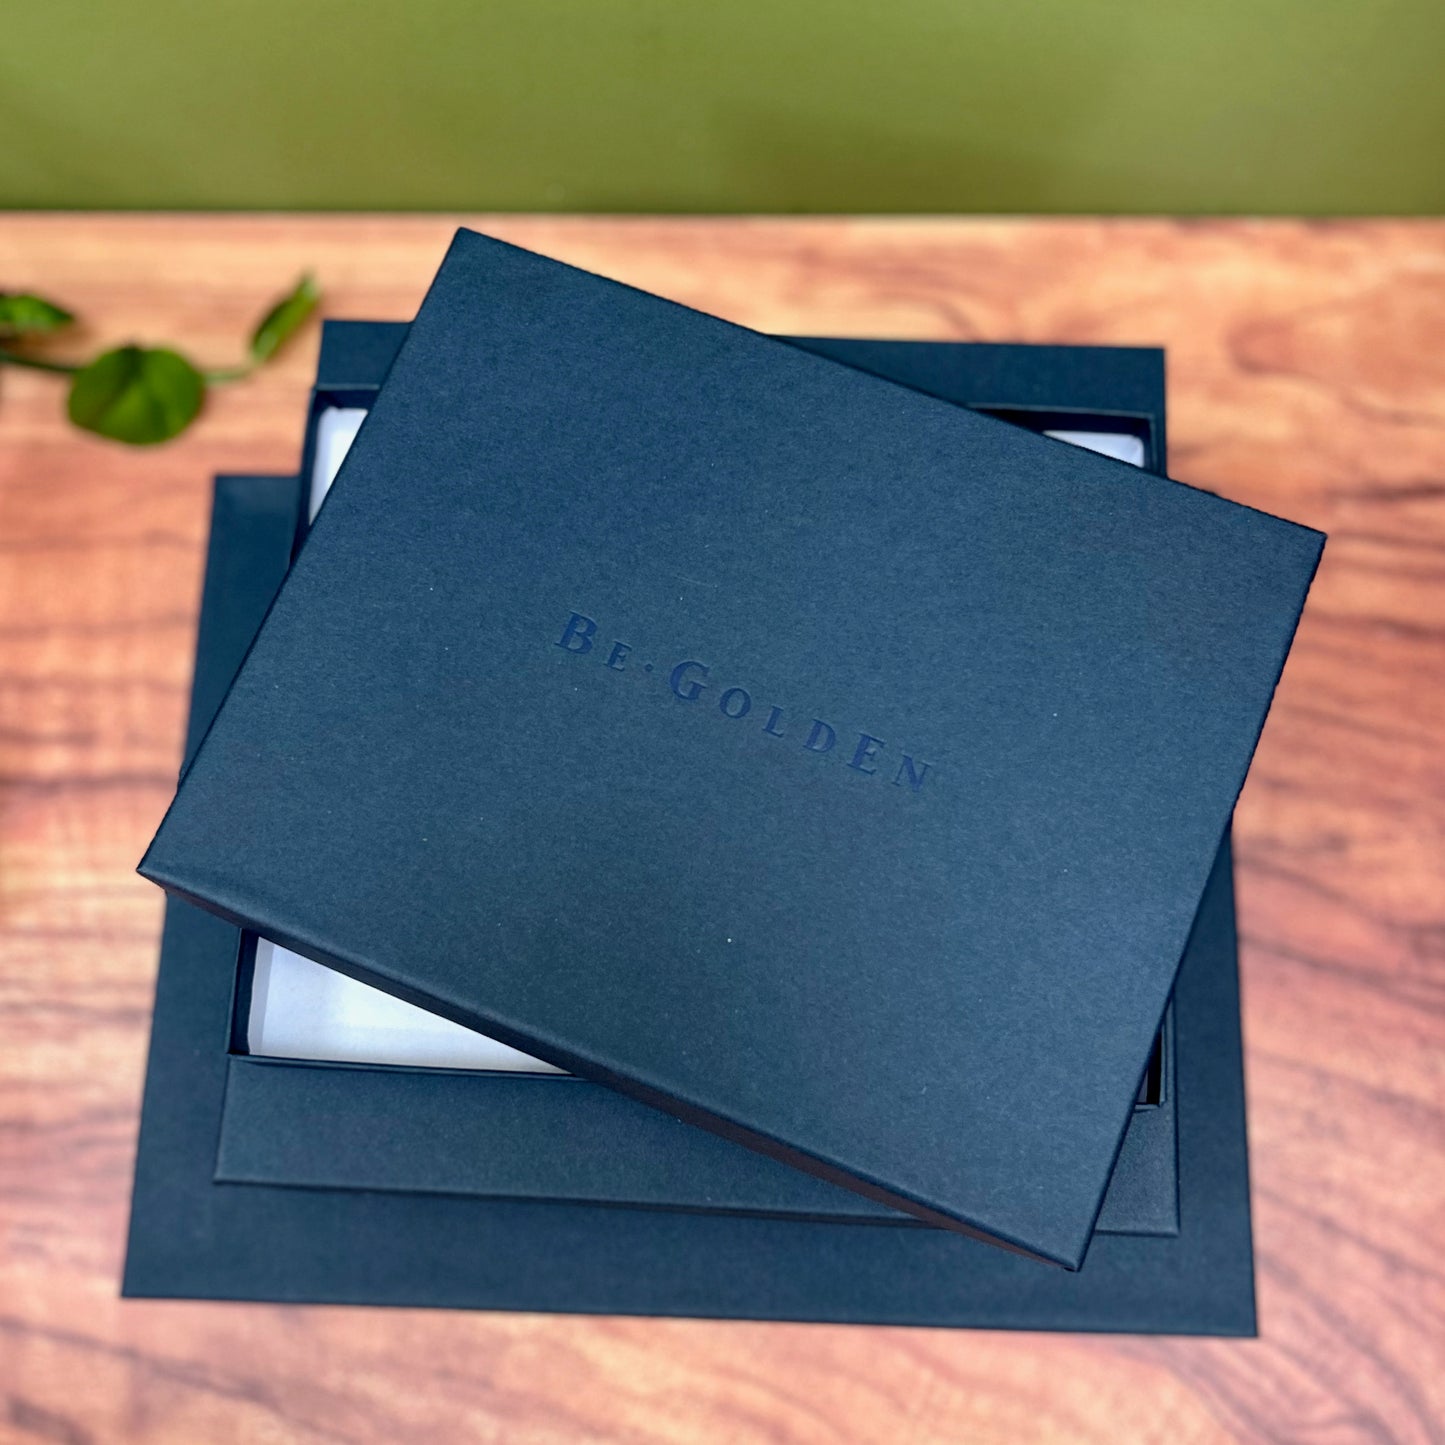 navy blue presentation boxes in a pile. The presentation boxes are bespoke and for protecting your begolen wedding guest book